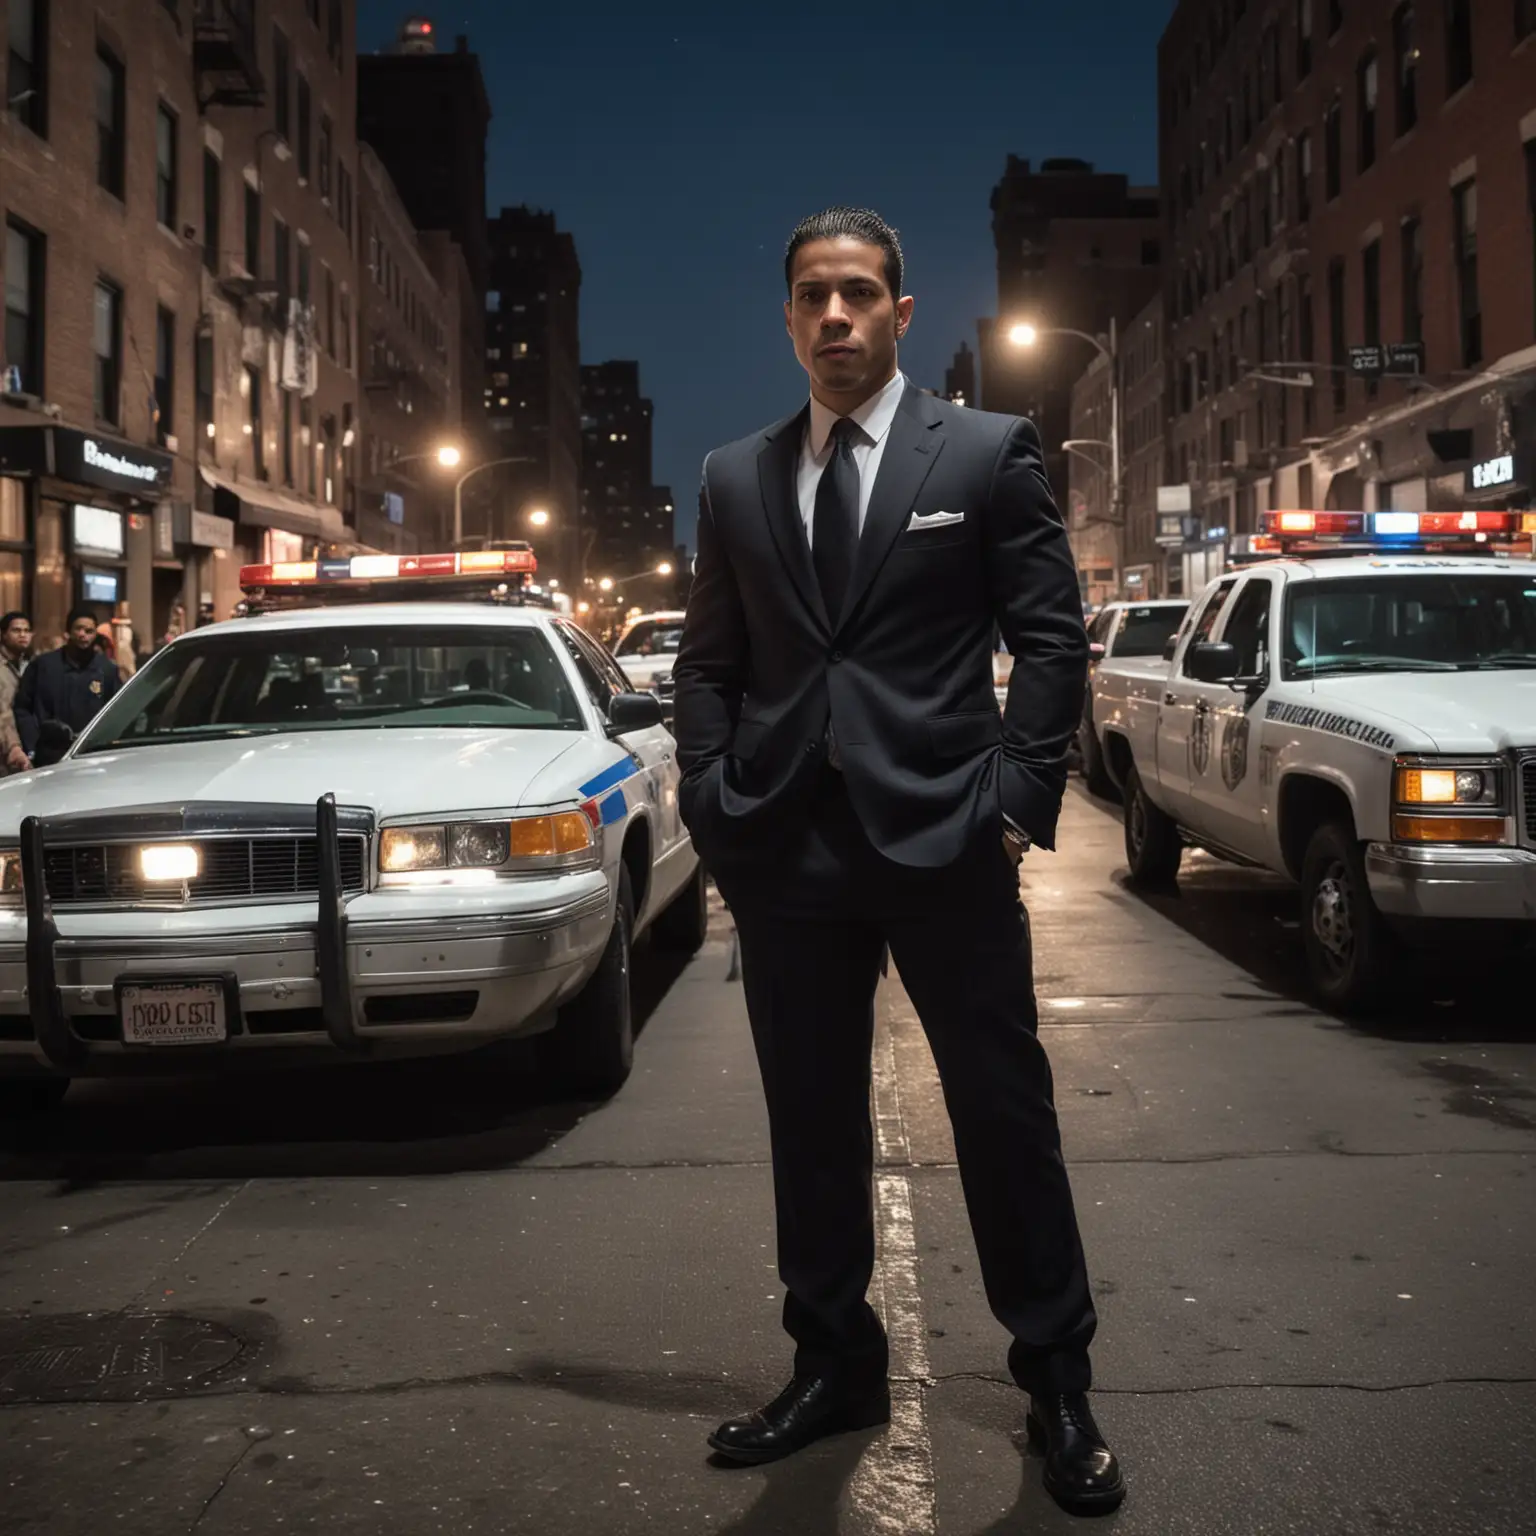 Puerto Rican Man in suit standing amidst urban gang violence, in the inner city of New York, night, police cars, people running in background
